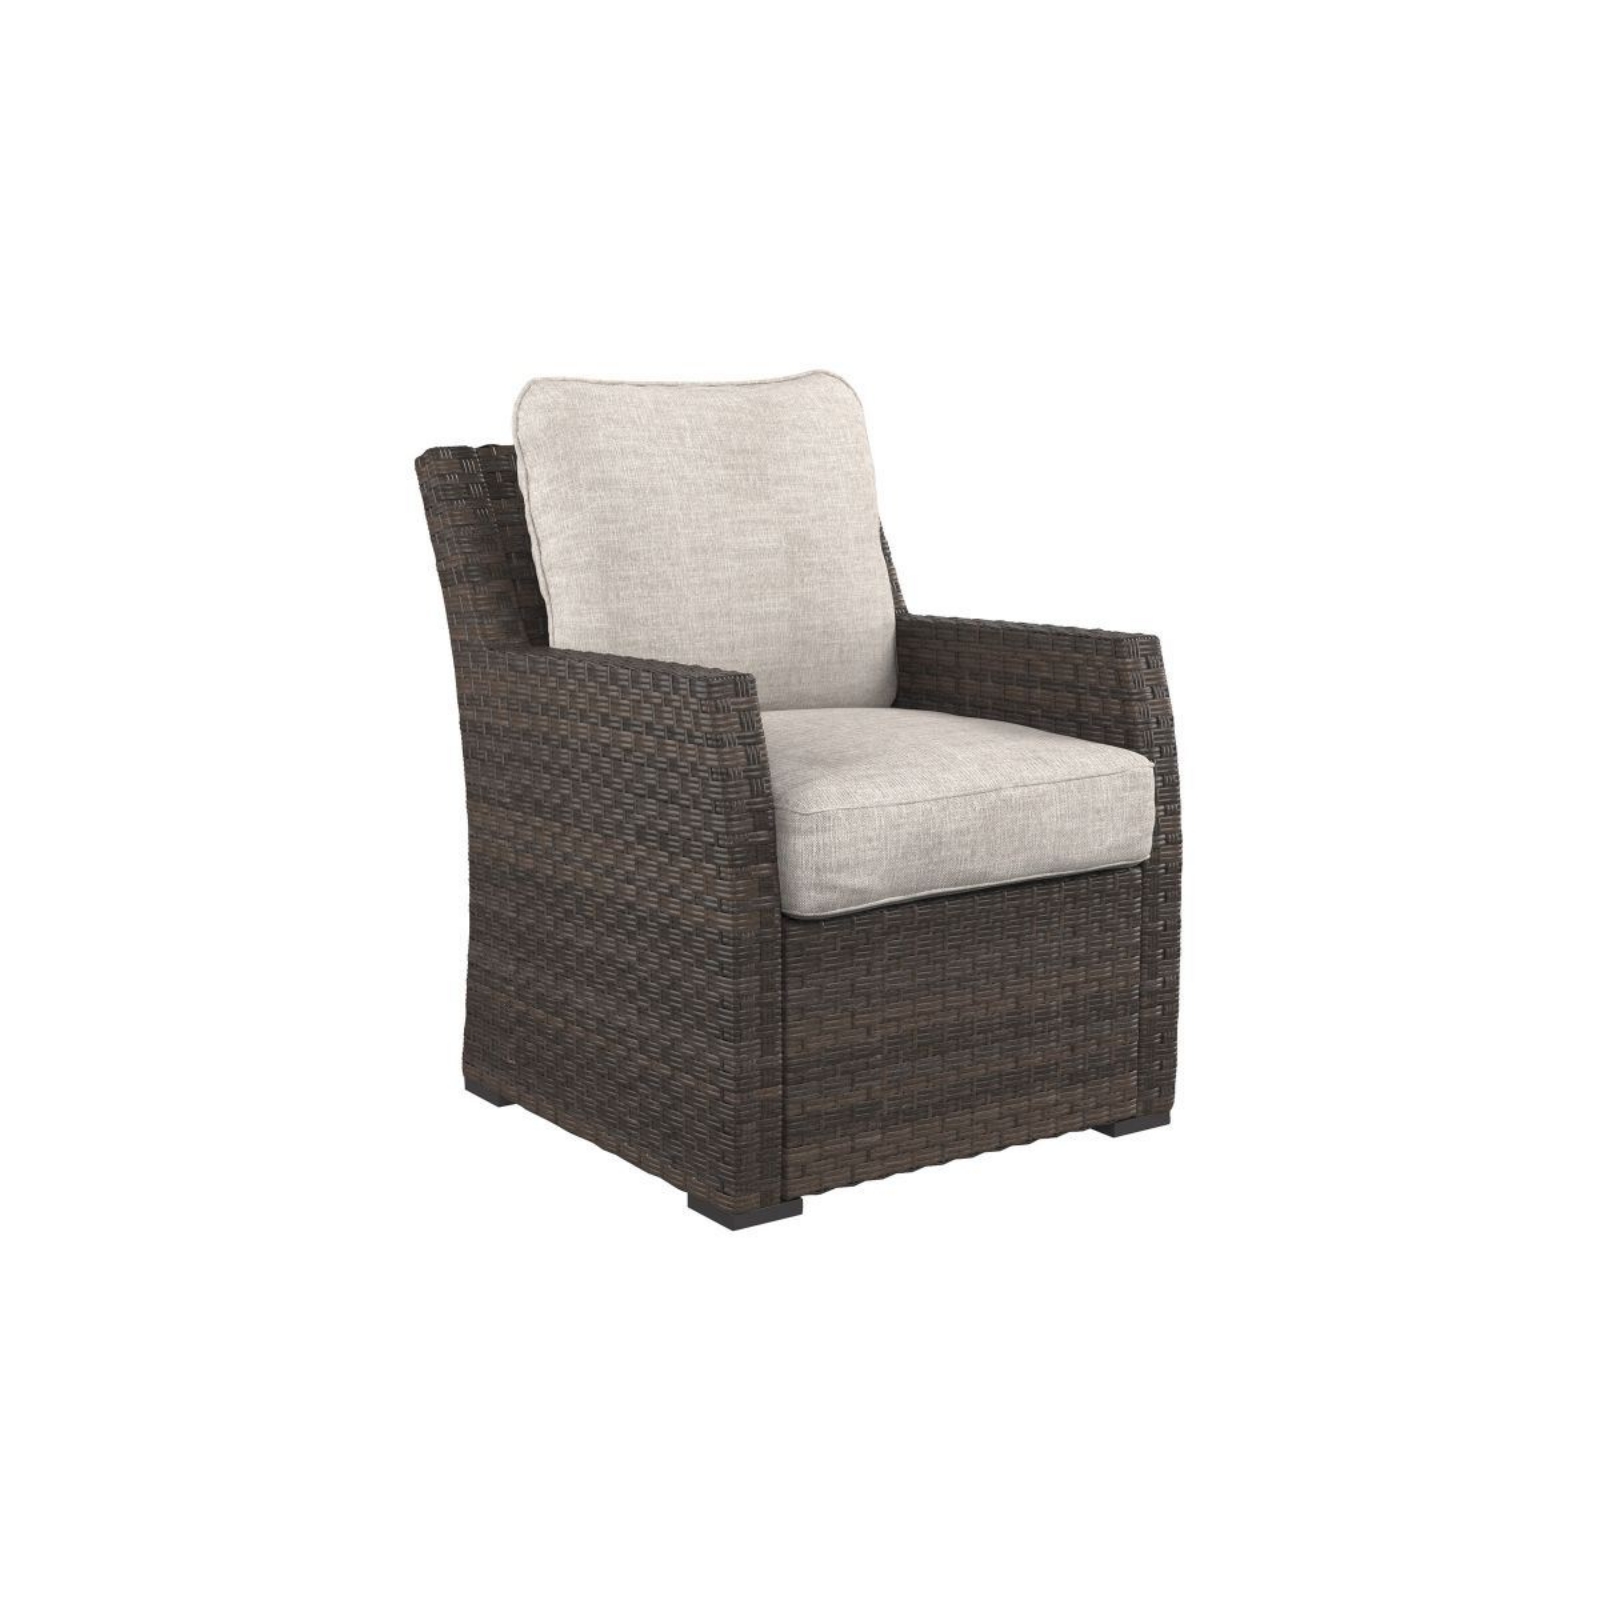 Picture of Salceda Patio Chair